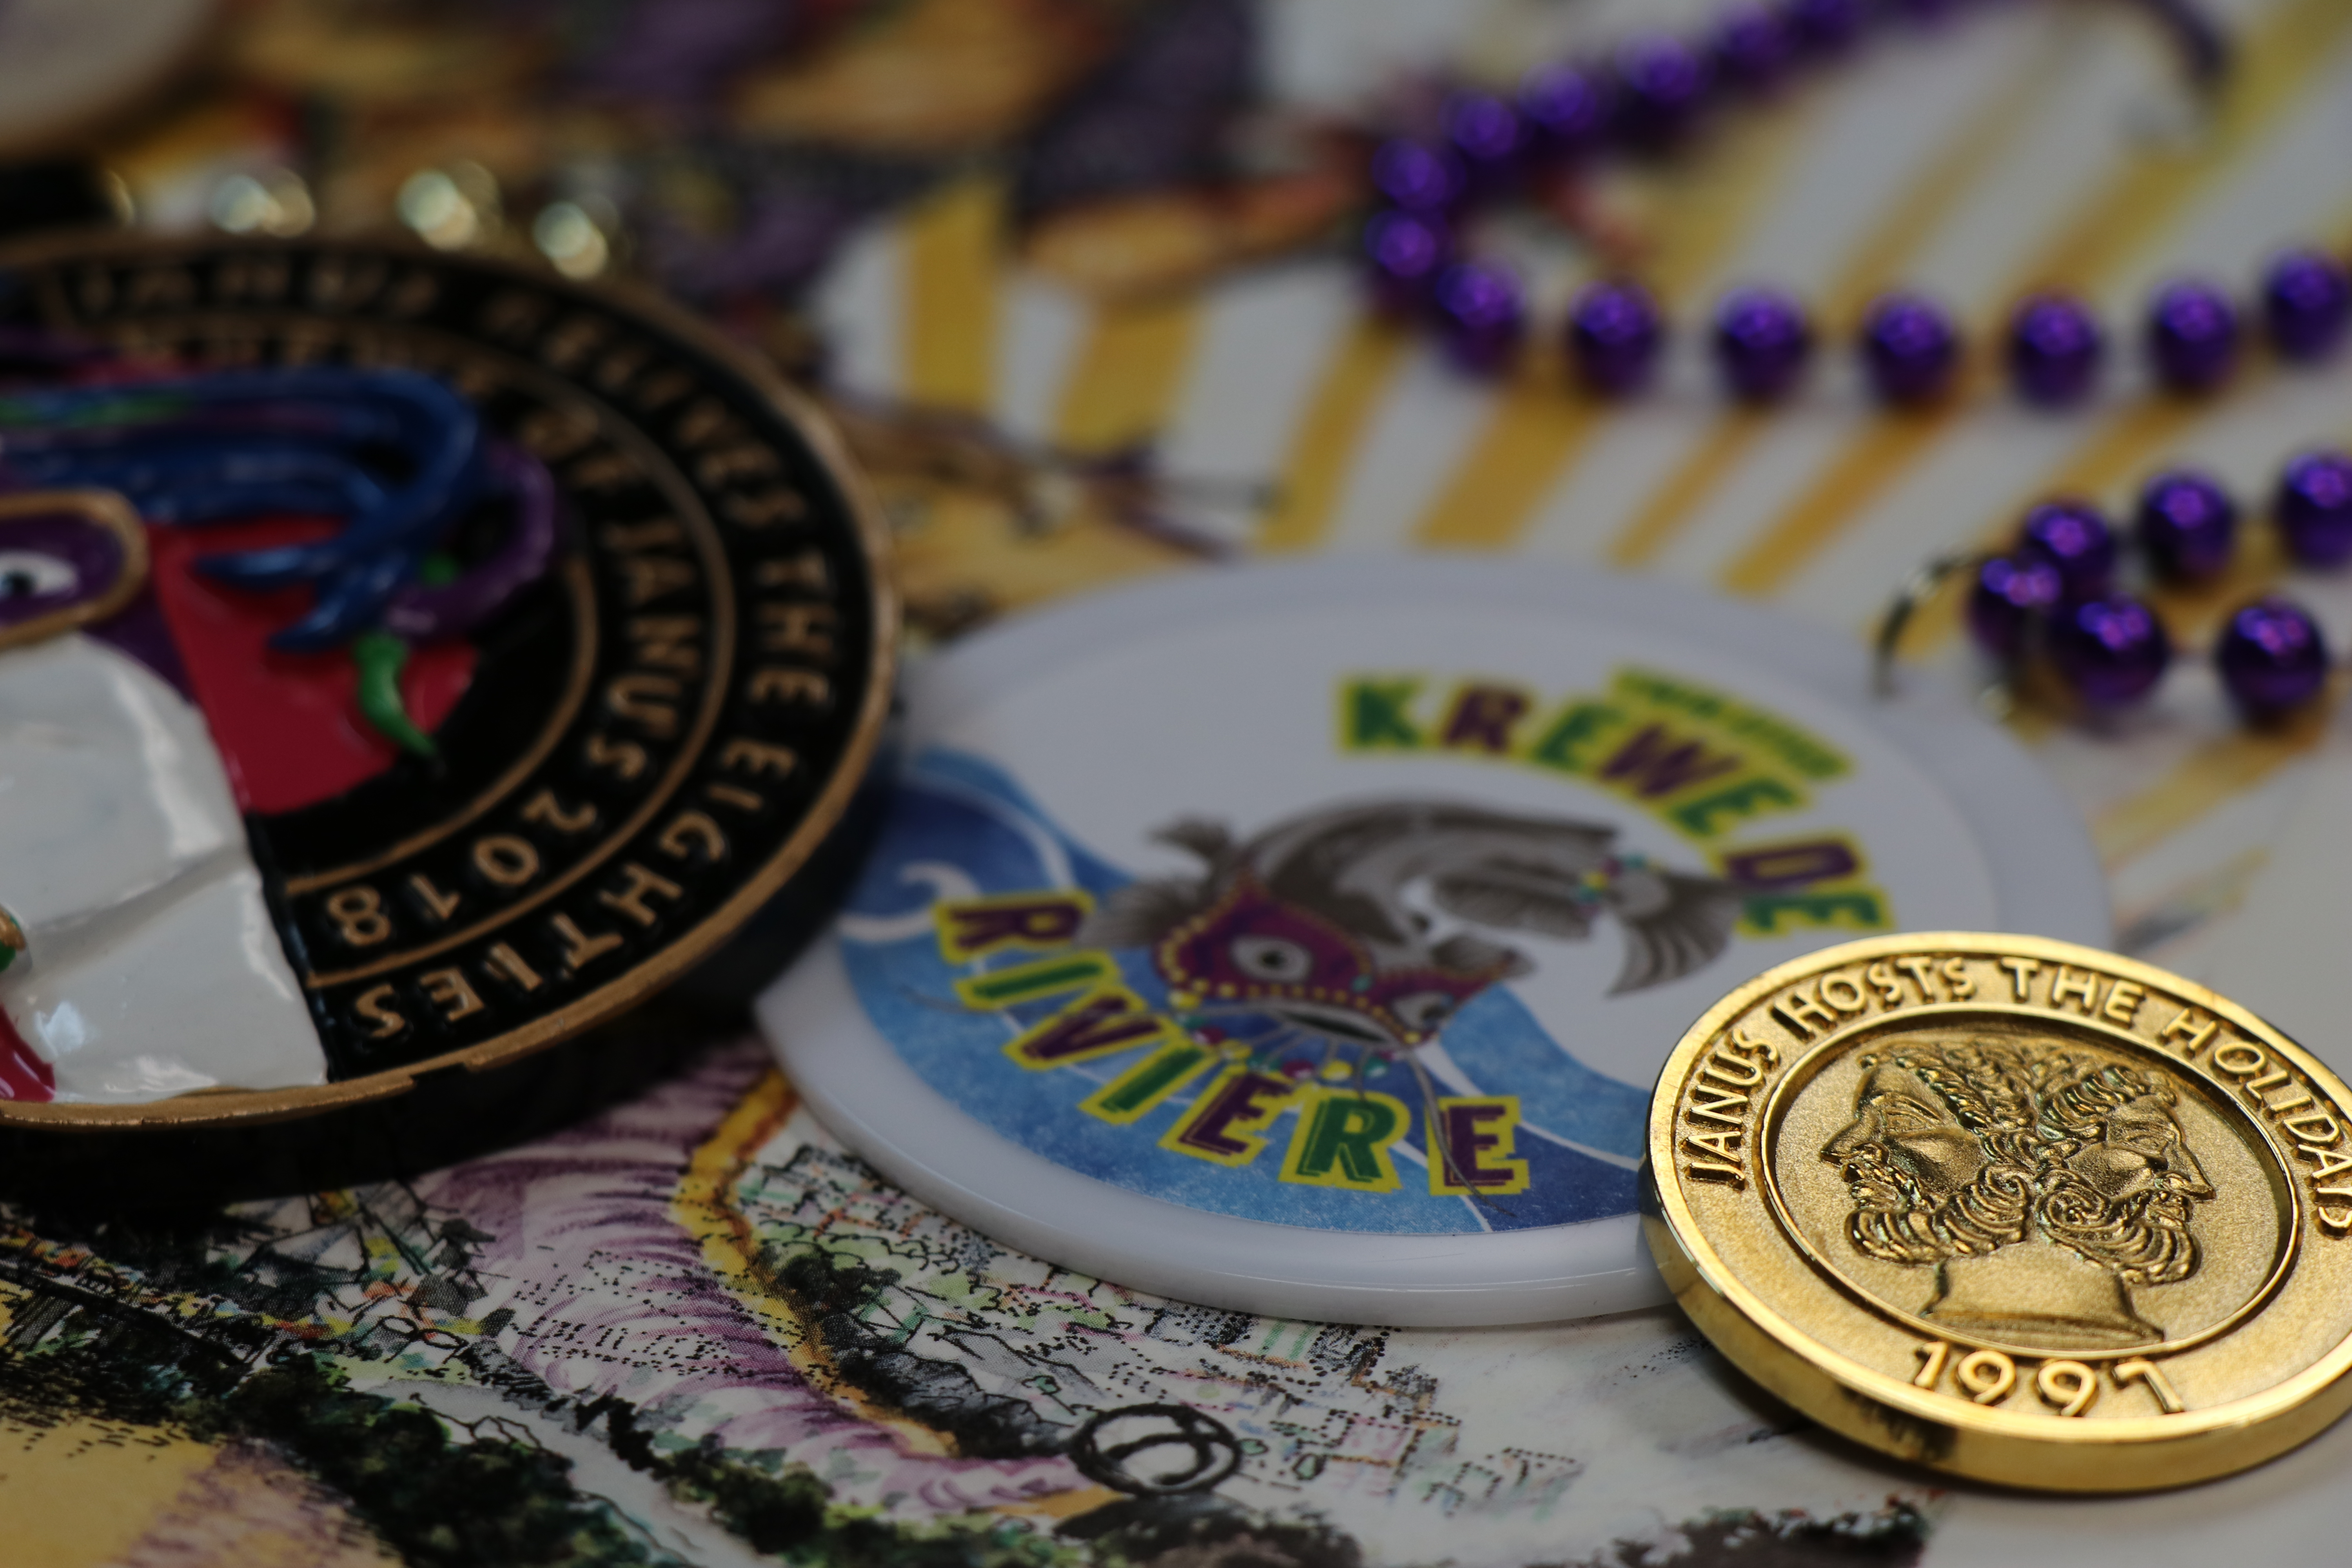 Mardi Gras doubloons and beads are arranged artfully on a table.